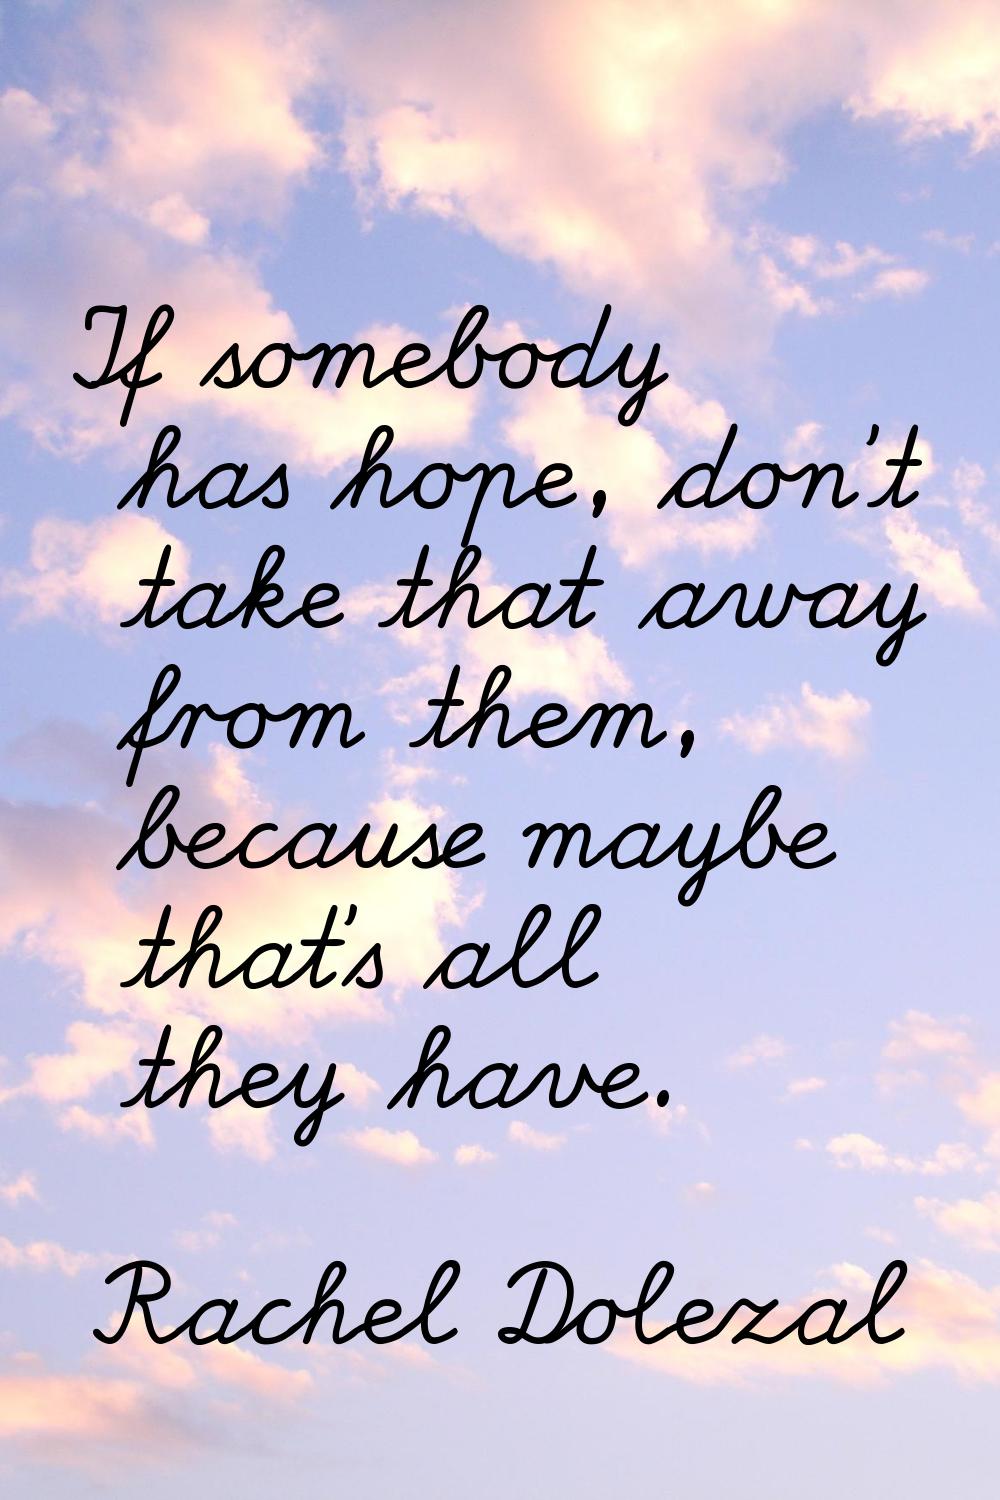 If somebody has hope, don't take that away from them, because maybe that's all they have.